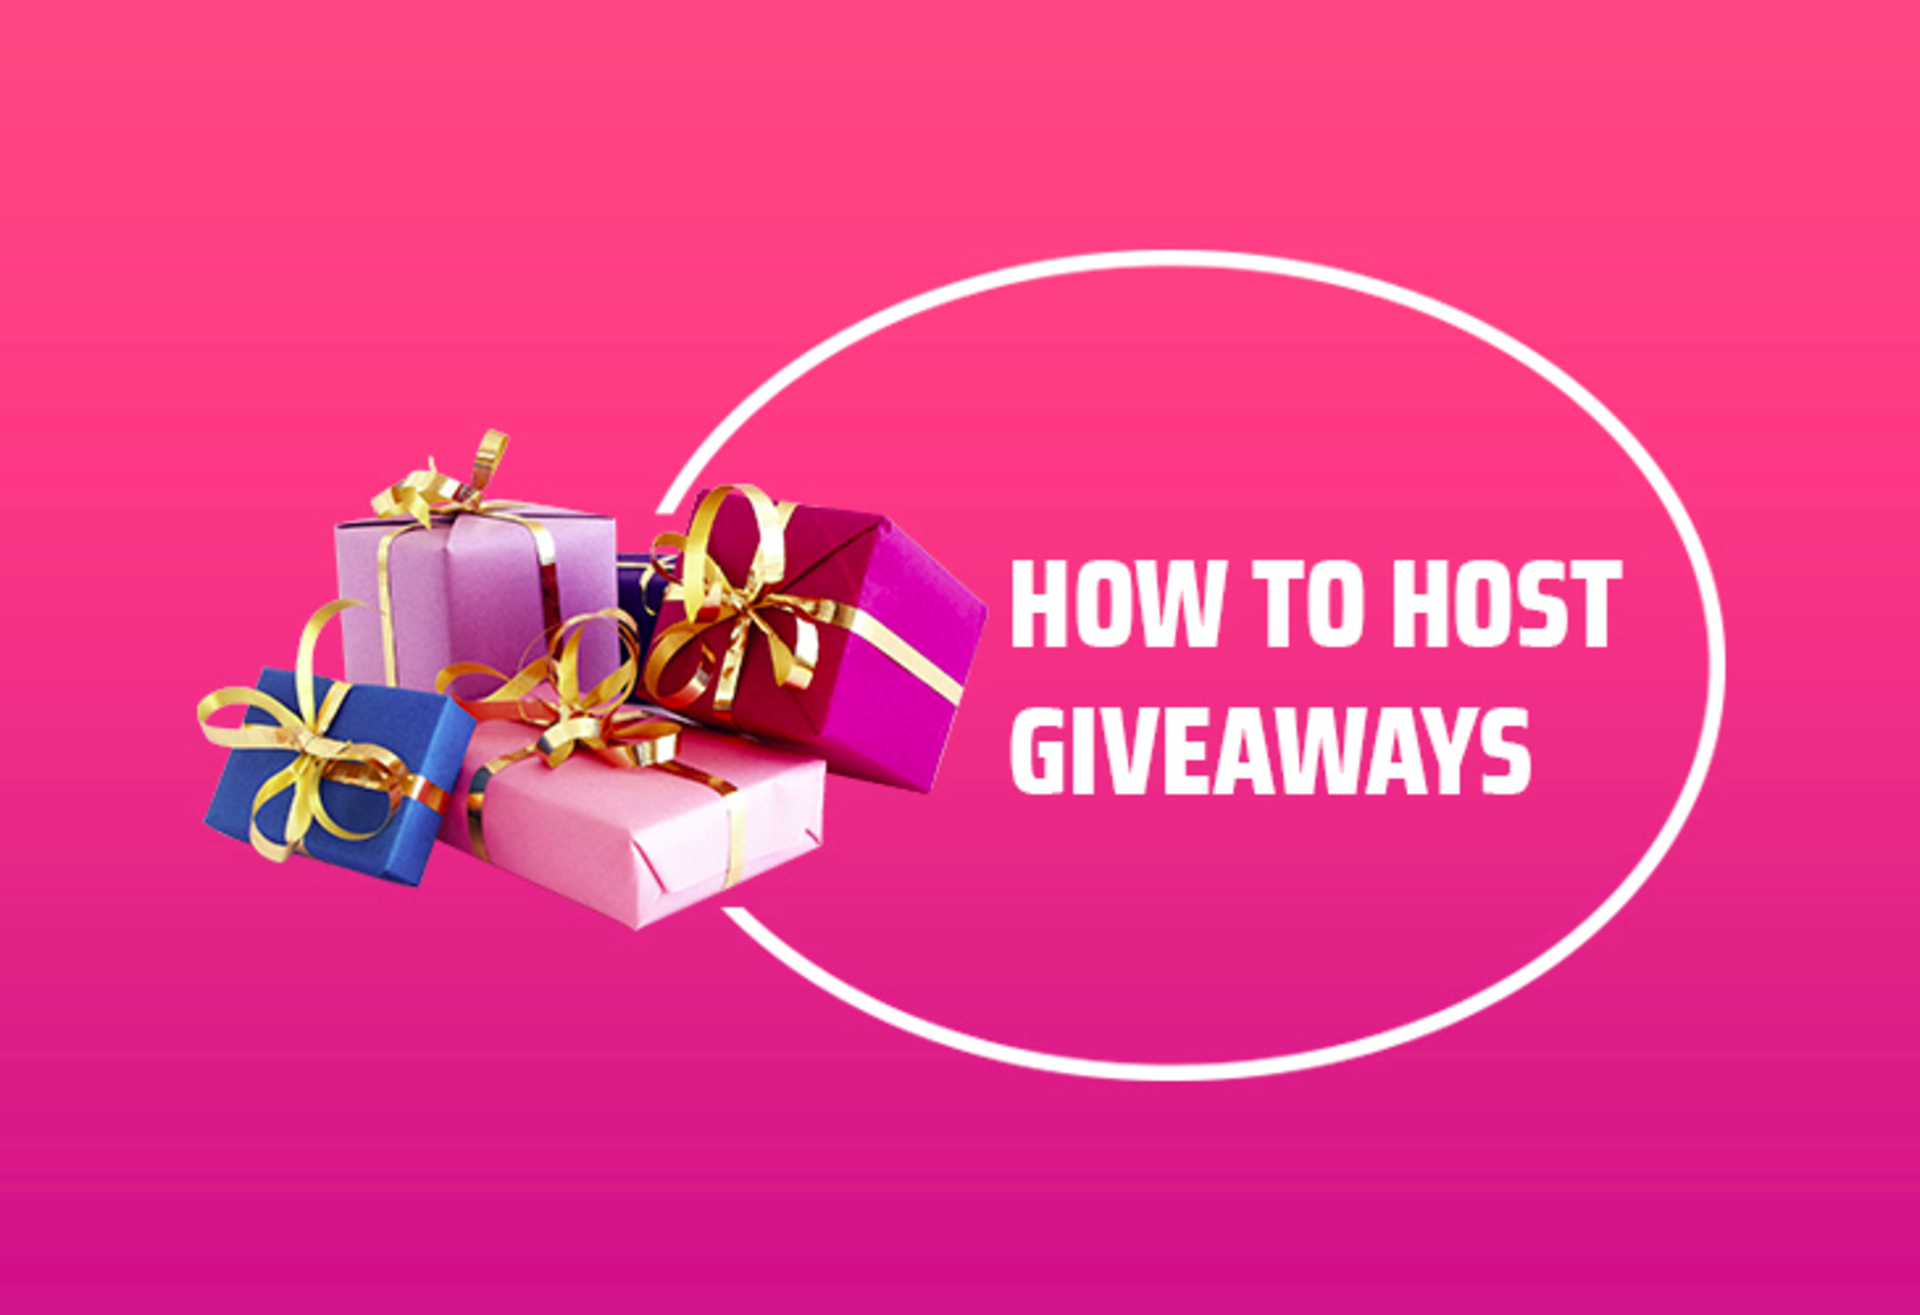 How to host giveaways: Using real examples from our Instagram image